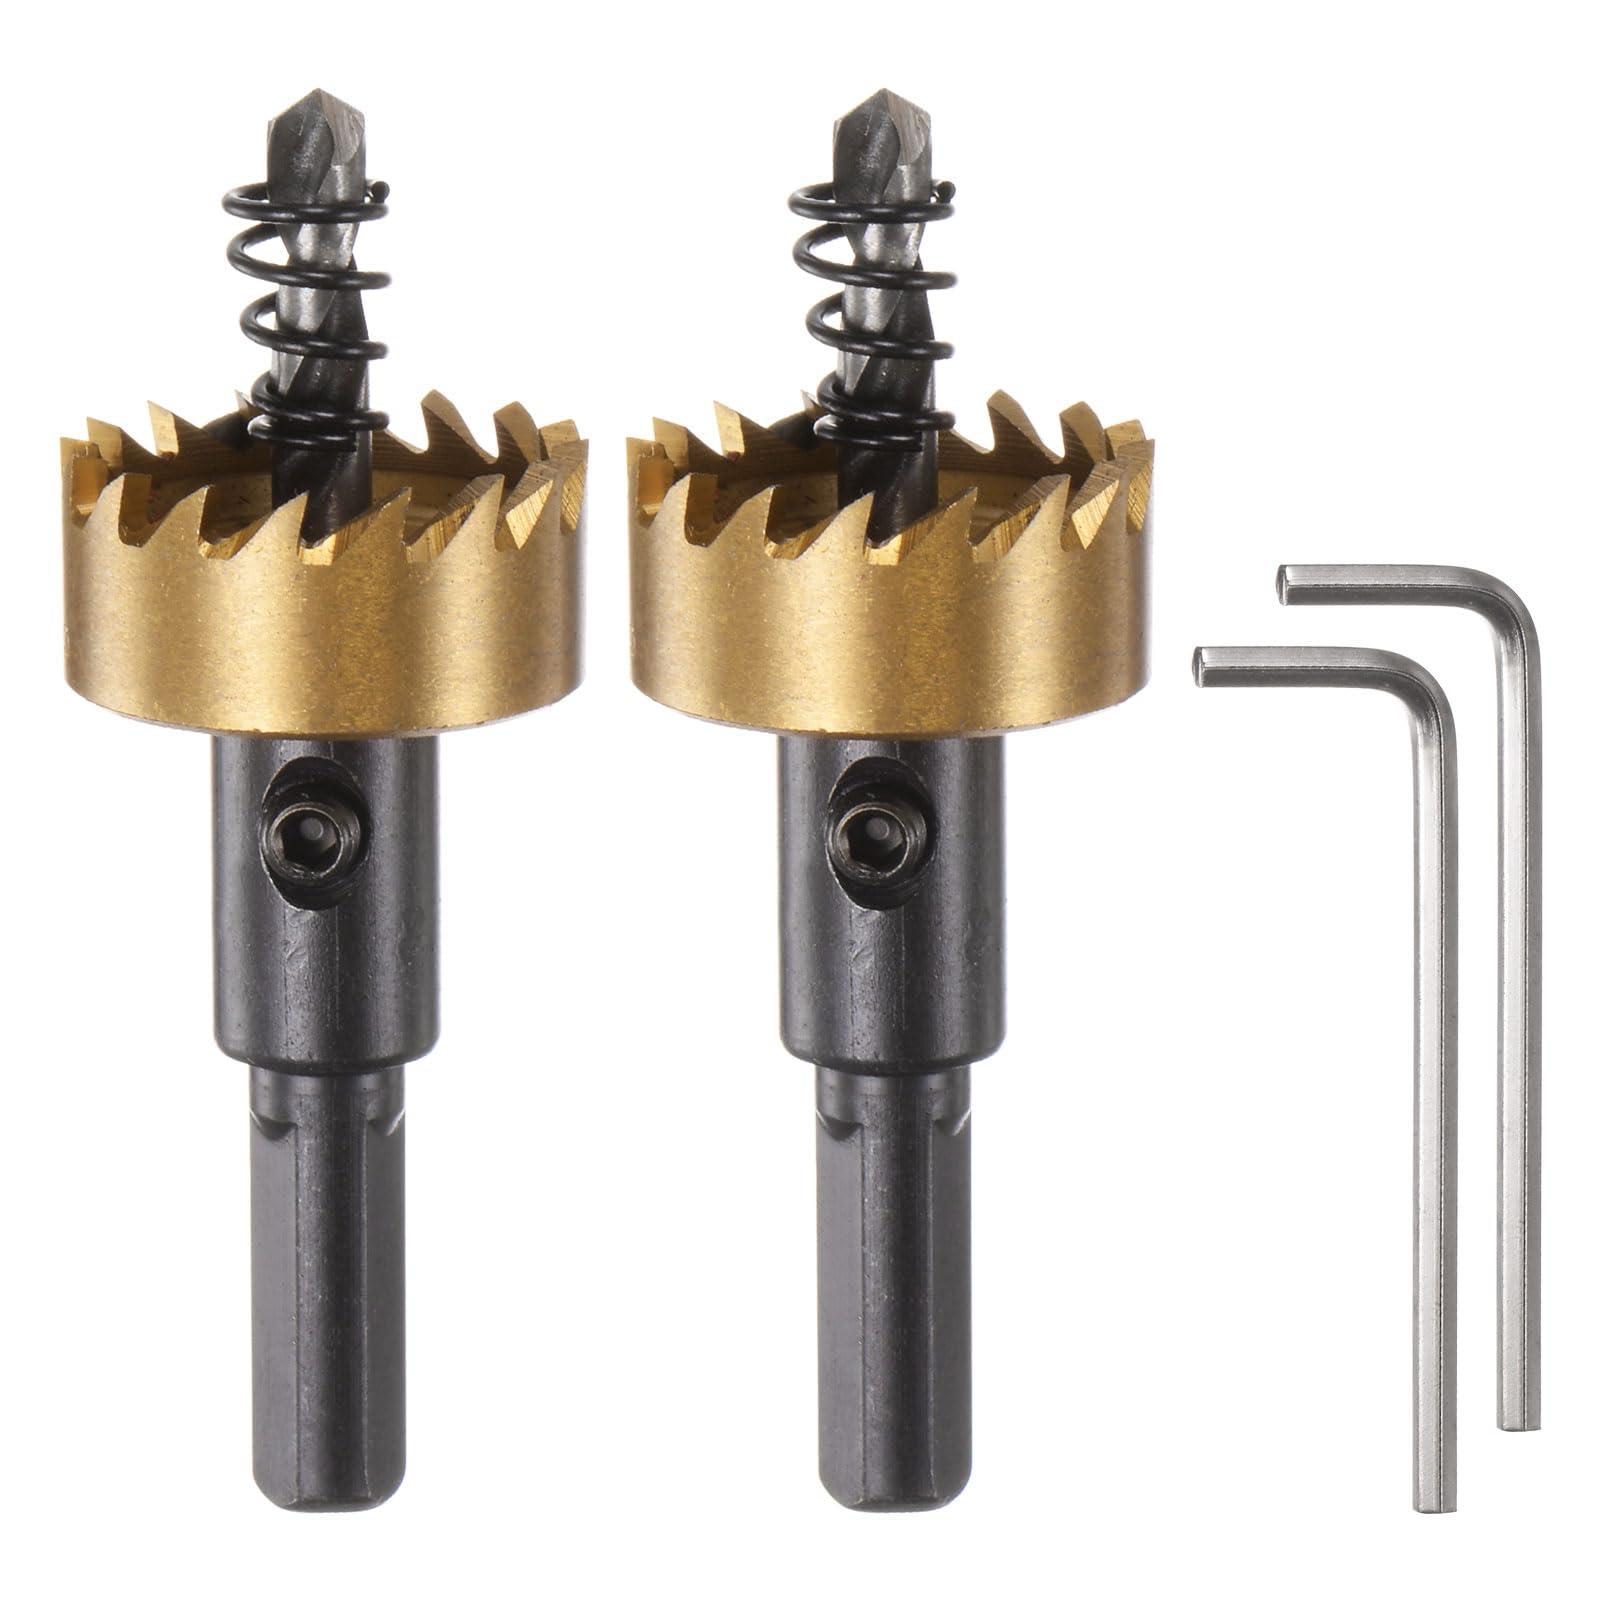 sourcing map 2pcs Hole Saws 26mm (1-2/85") M35 HSS (High Speed Steel) Titanium Coated Drill Bits Cutters Openers for Stainless Steel Aluminum Alloy Metal Wood Plastic